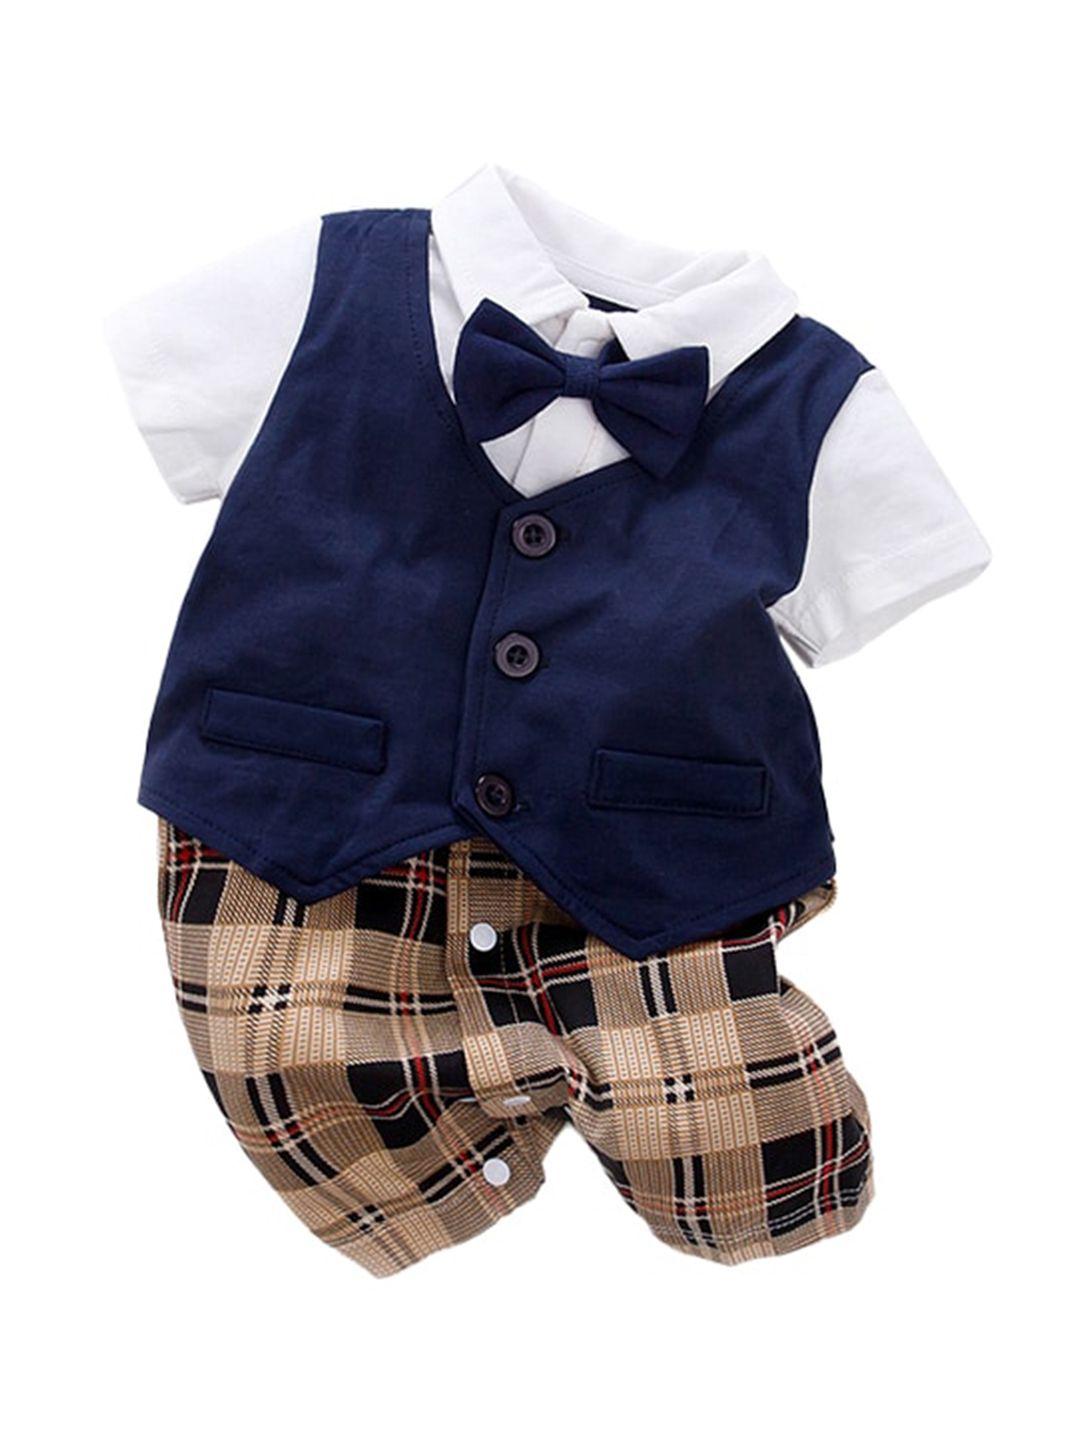 stylecast-infant-boys-navy-blue-checked-cotton-rompers-with-bow